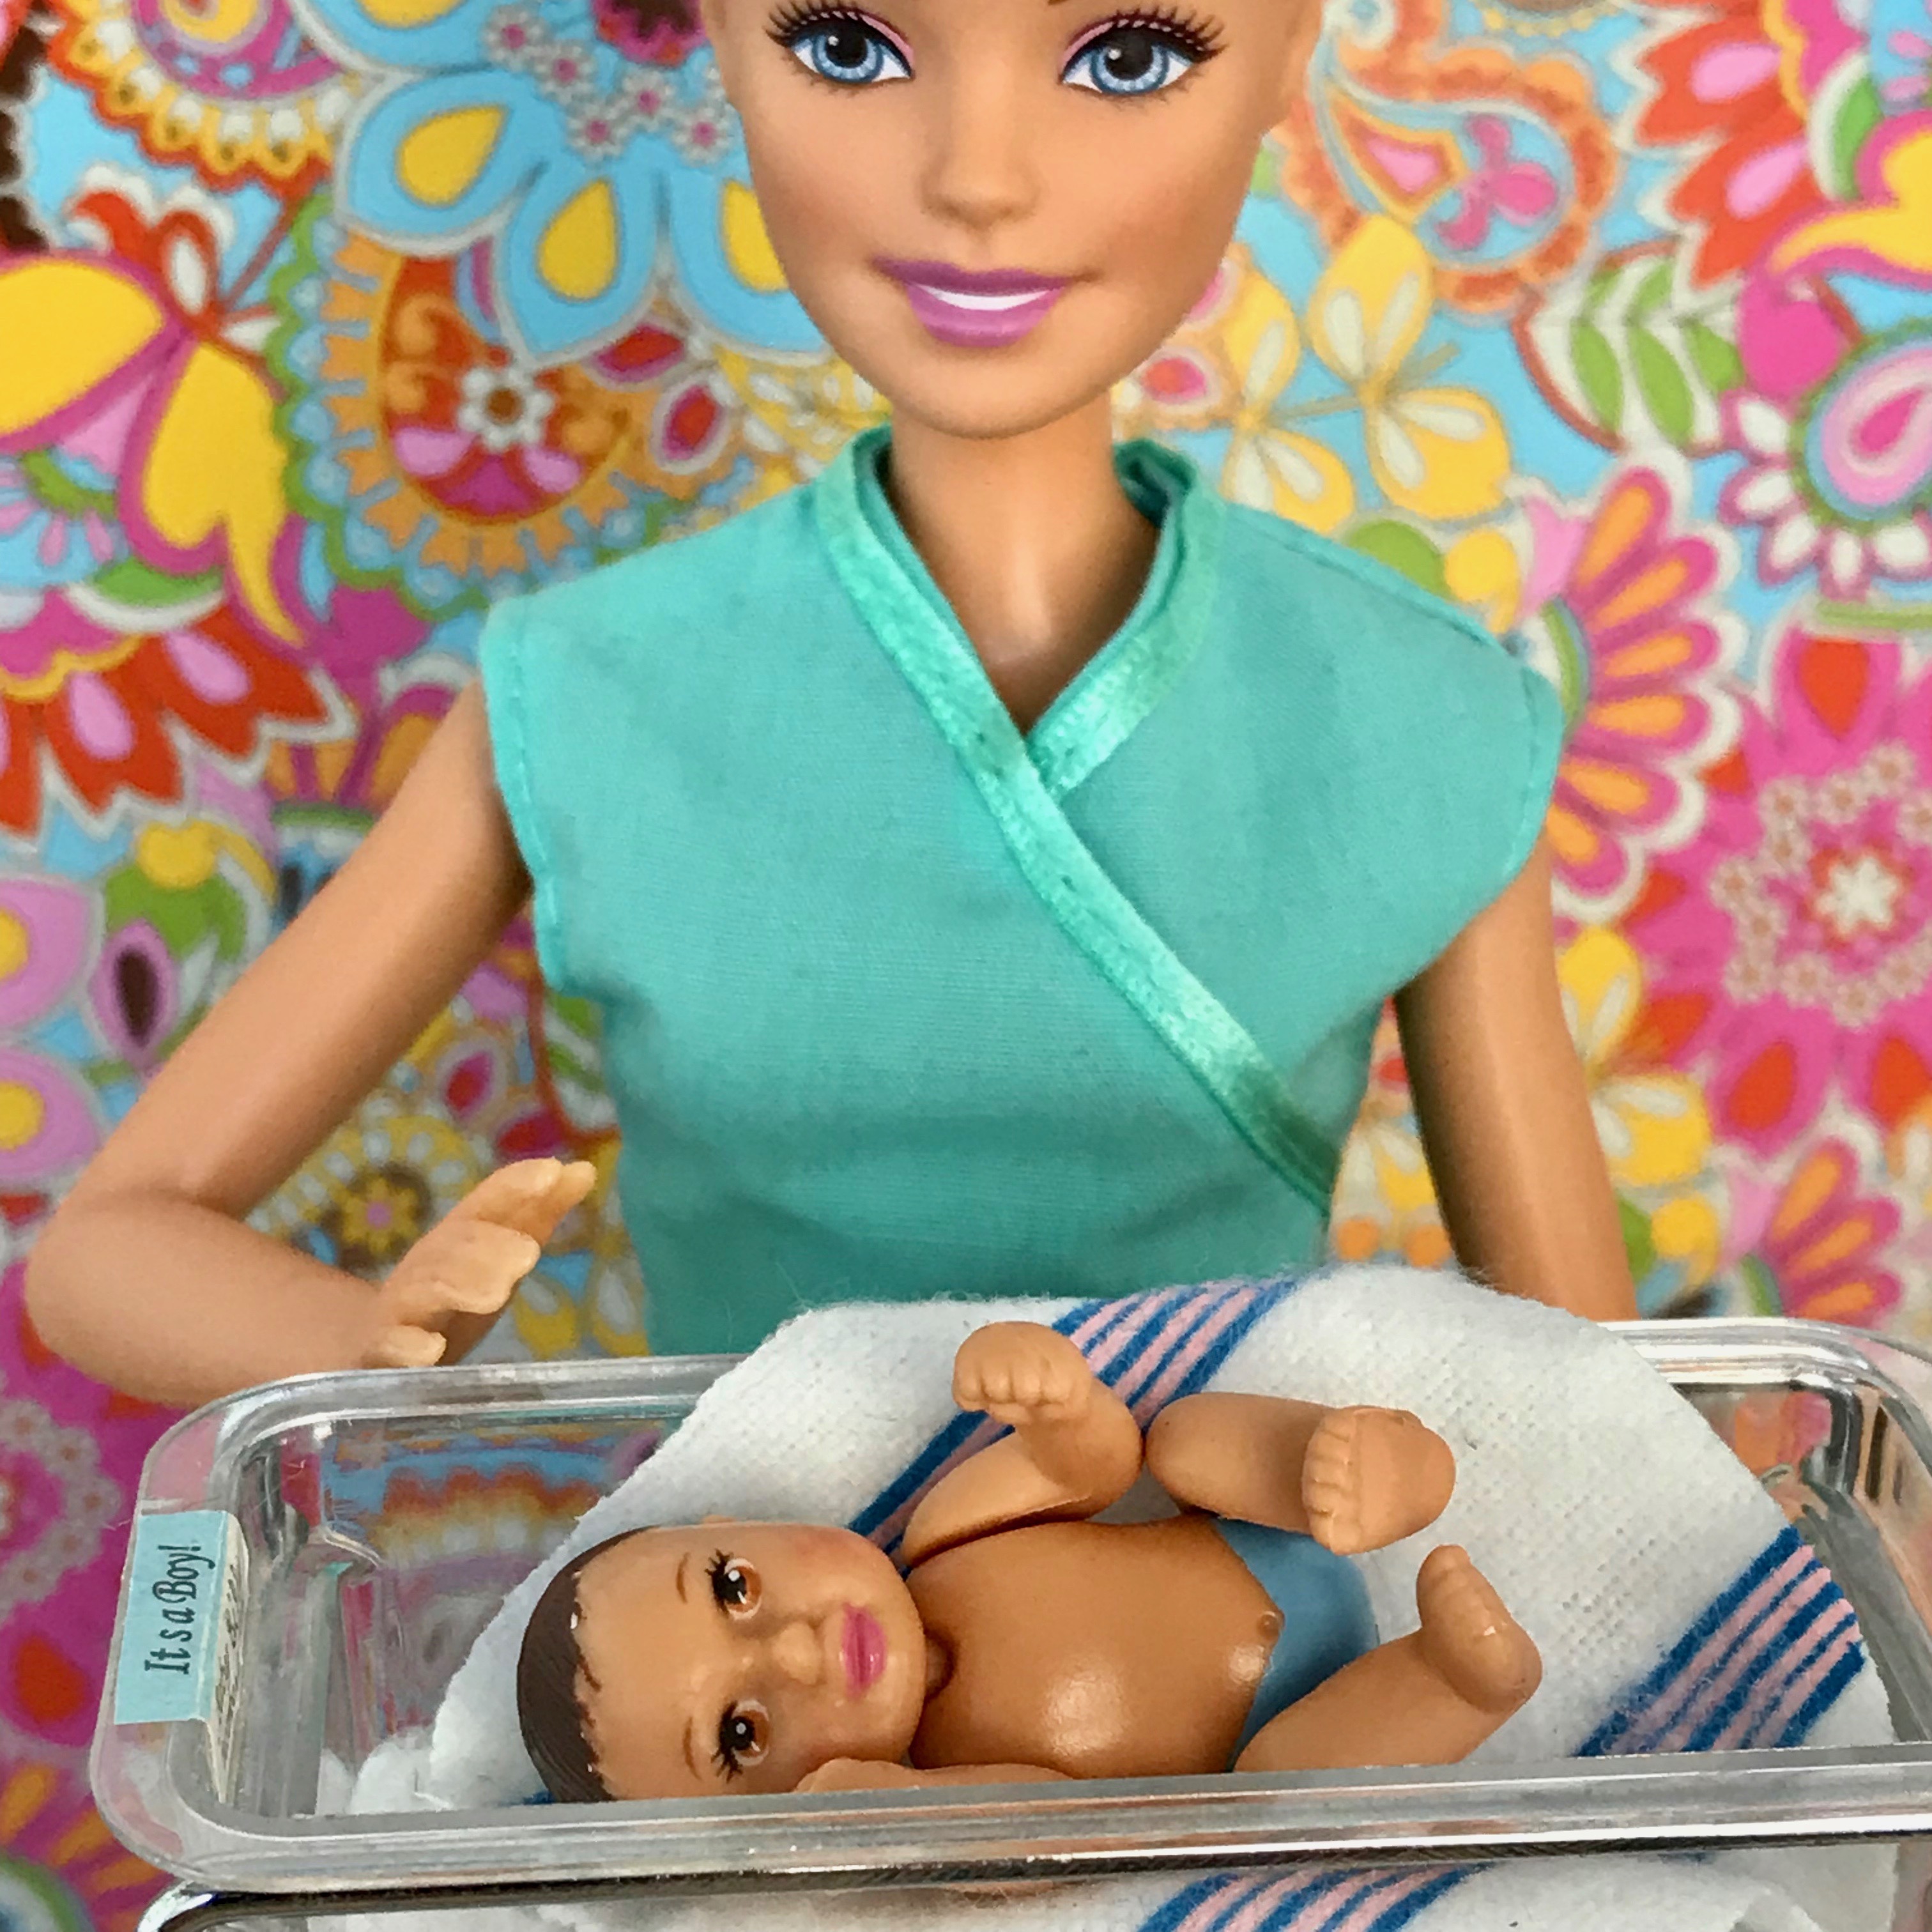 the barbie baby